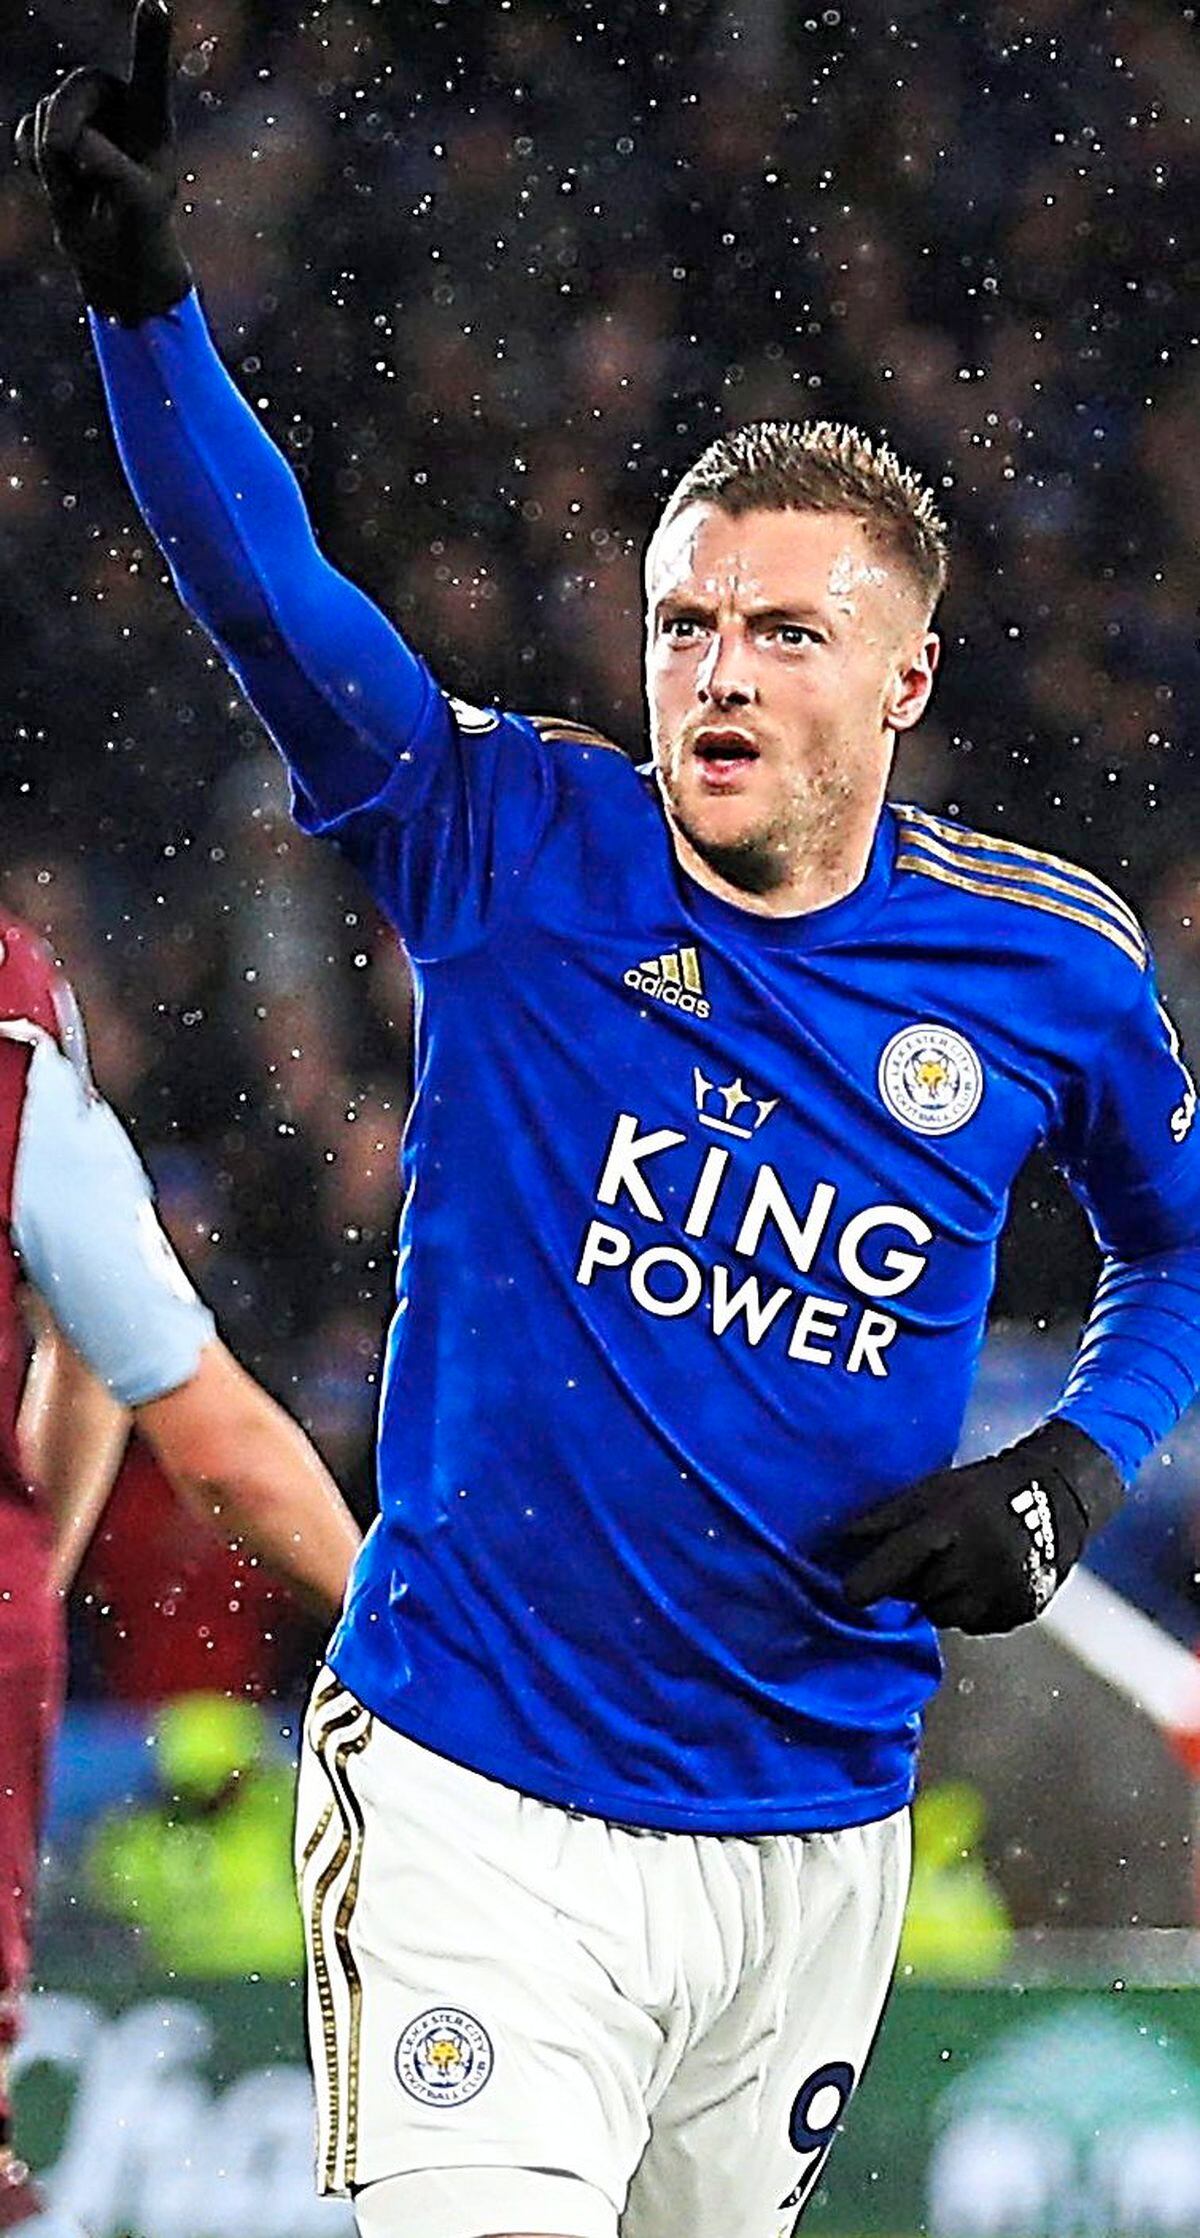 
              
Leicester City's Jamie Vardy celebrates scoring his side's third goal of the game during the Premier League match at the King Power Stadium, Leicester. PA Photo. Picture date: Monday March 9, 2020. See PA story SOCCER Leicester. Photo credit should read: Nigel French/PA Wire. RESTRICTIONS: EDITORIAL USE ONLY No use with unauthorised audio, video, data, fixture lists, club/league logos or "live" services. Online in-match use limited to 120 images, no video emulation. No use in betting, games or single club/league/player publications.
            
